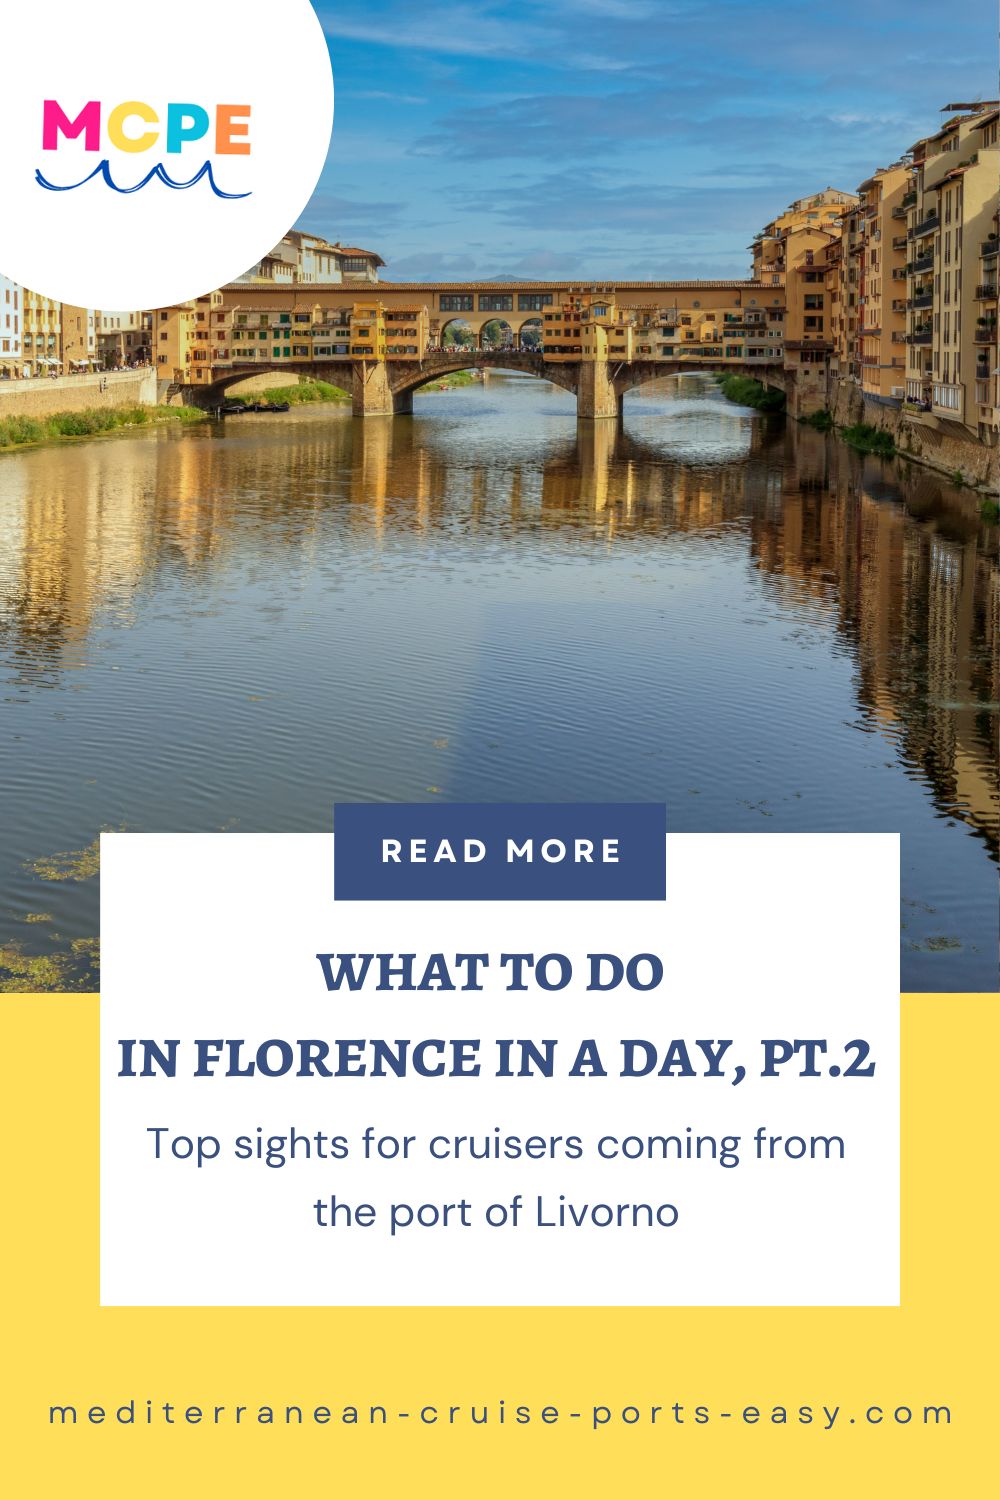 What to do in Florence in a day 2